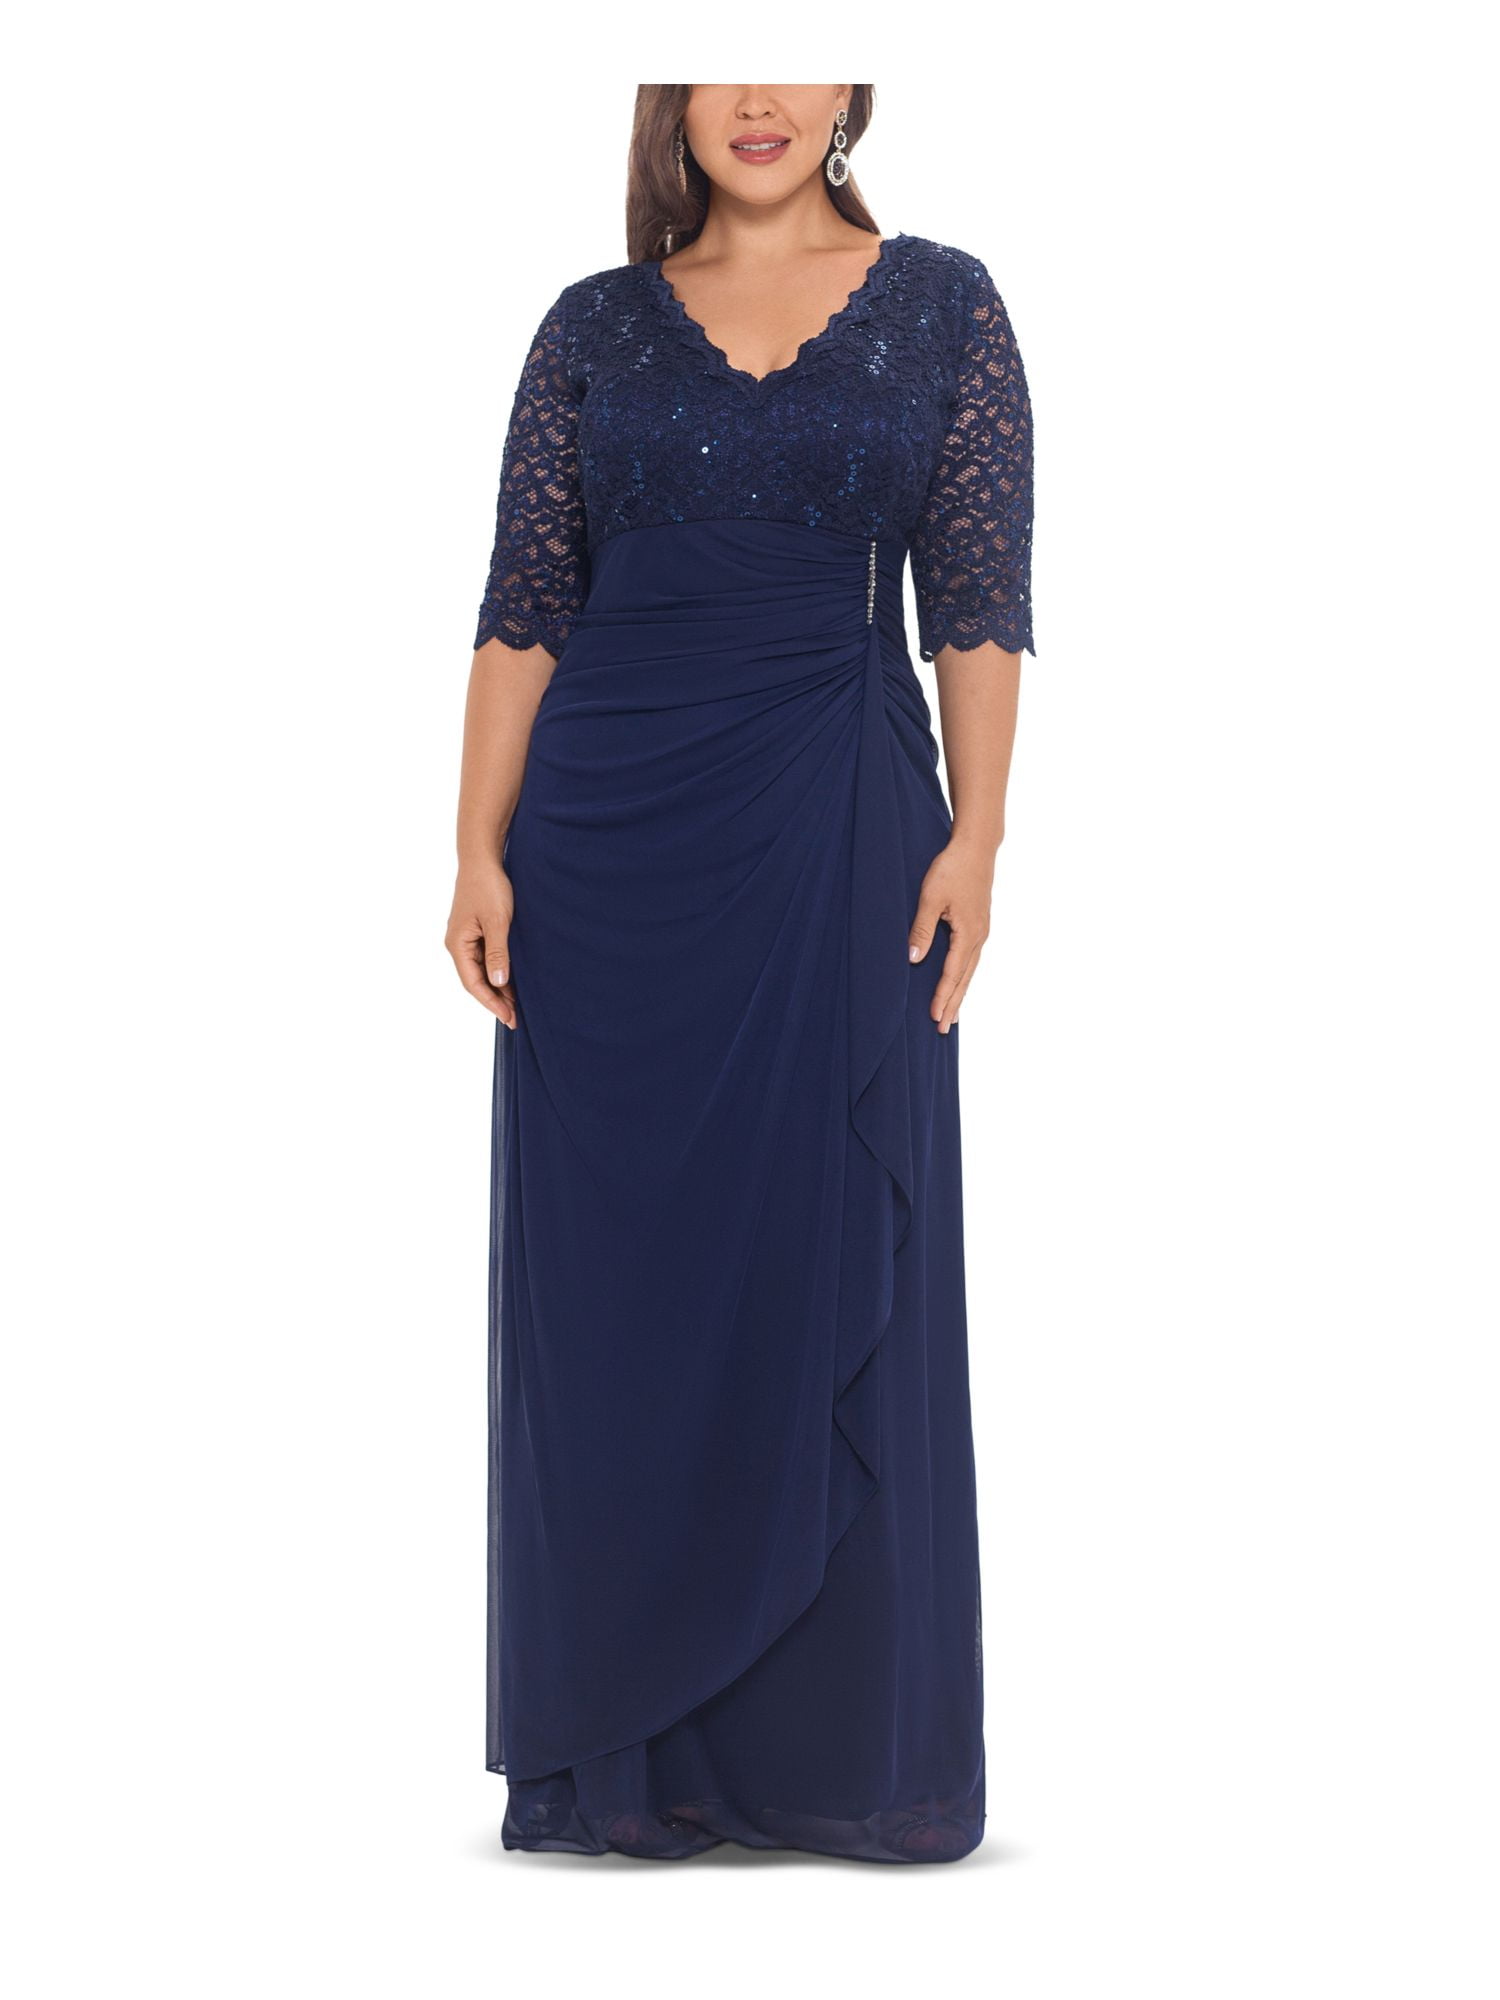 Adore by Justin Alexander Styles Perfect for Plus Size Brides | Adore by  Justin Alexander